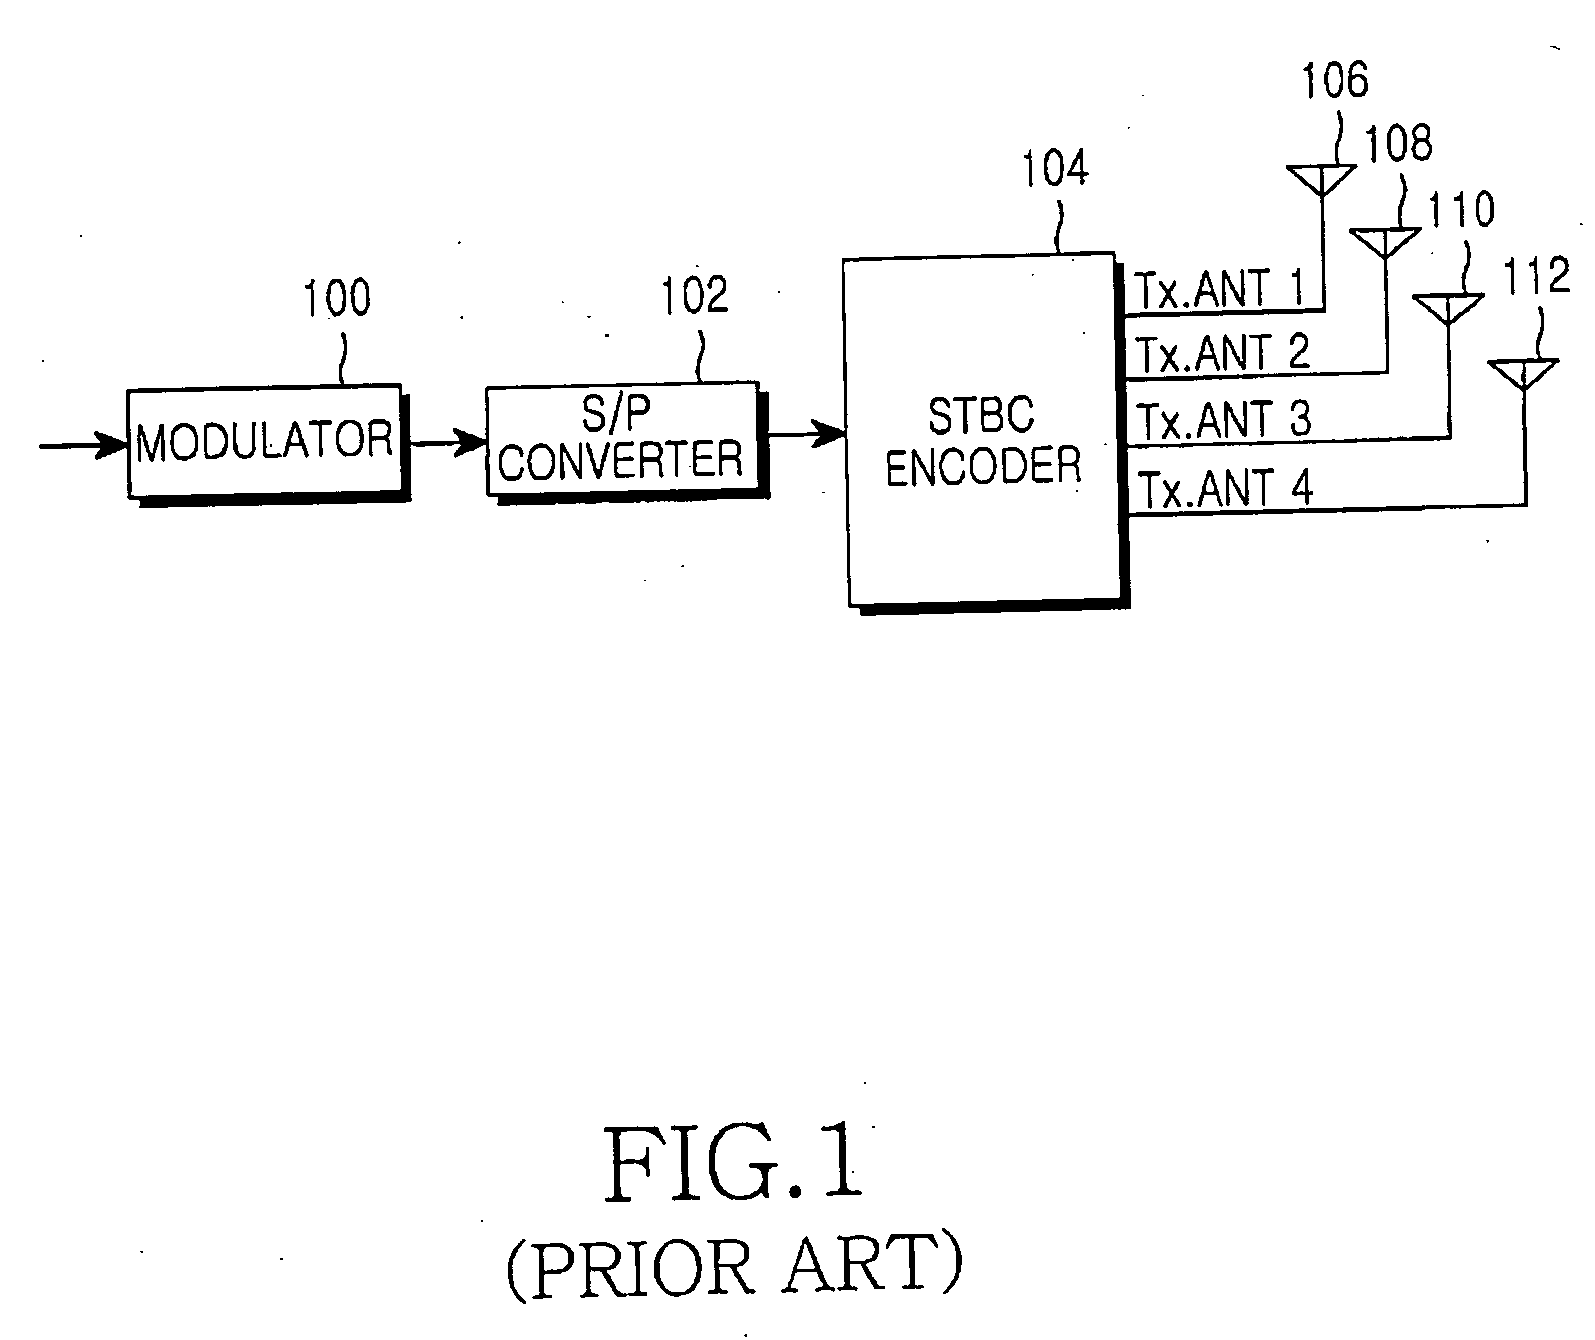 Apparatus and method for space-time frequency block coding in a wireless communication system